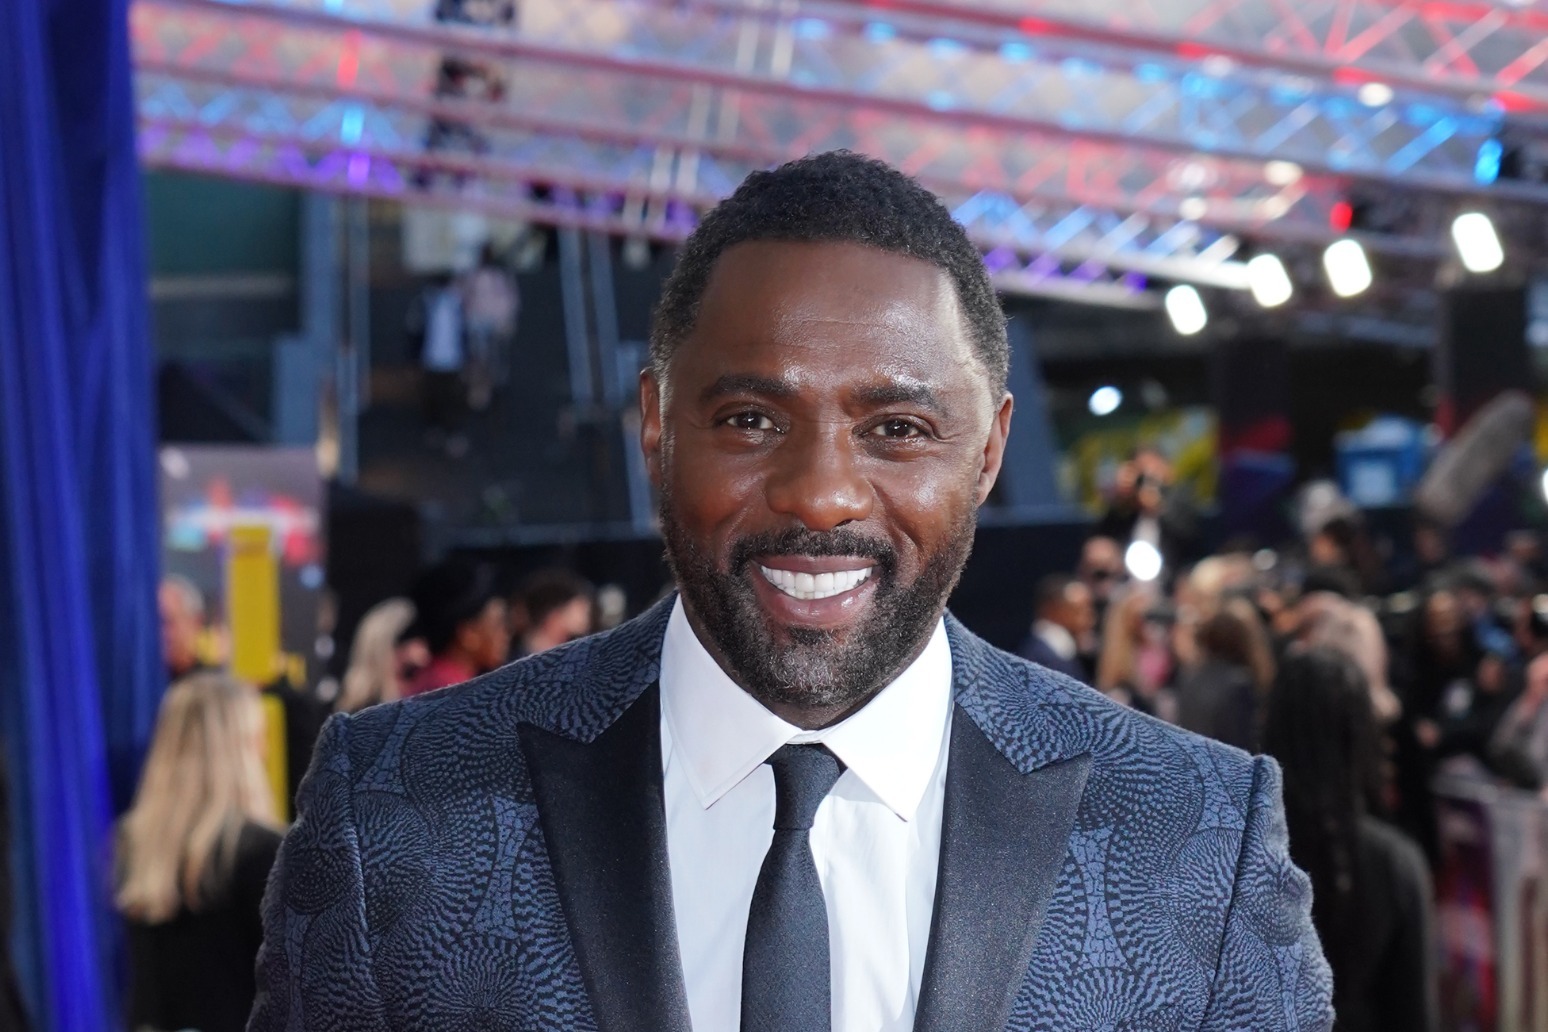 Its important to use my voice in the fight against knife crime says Idris Elba